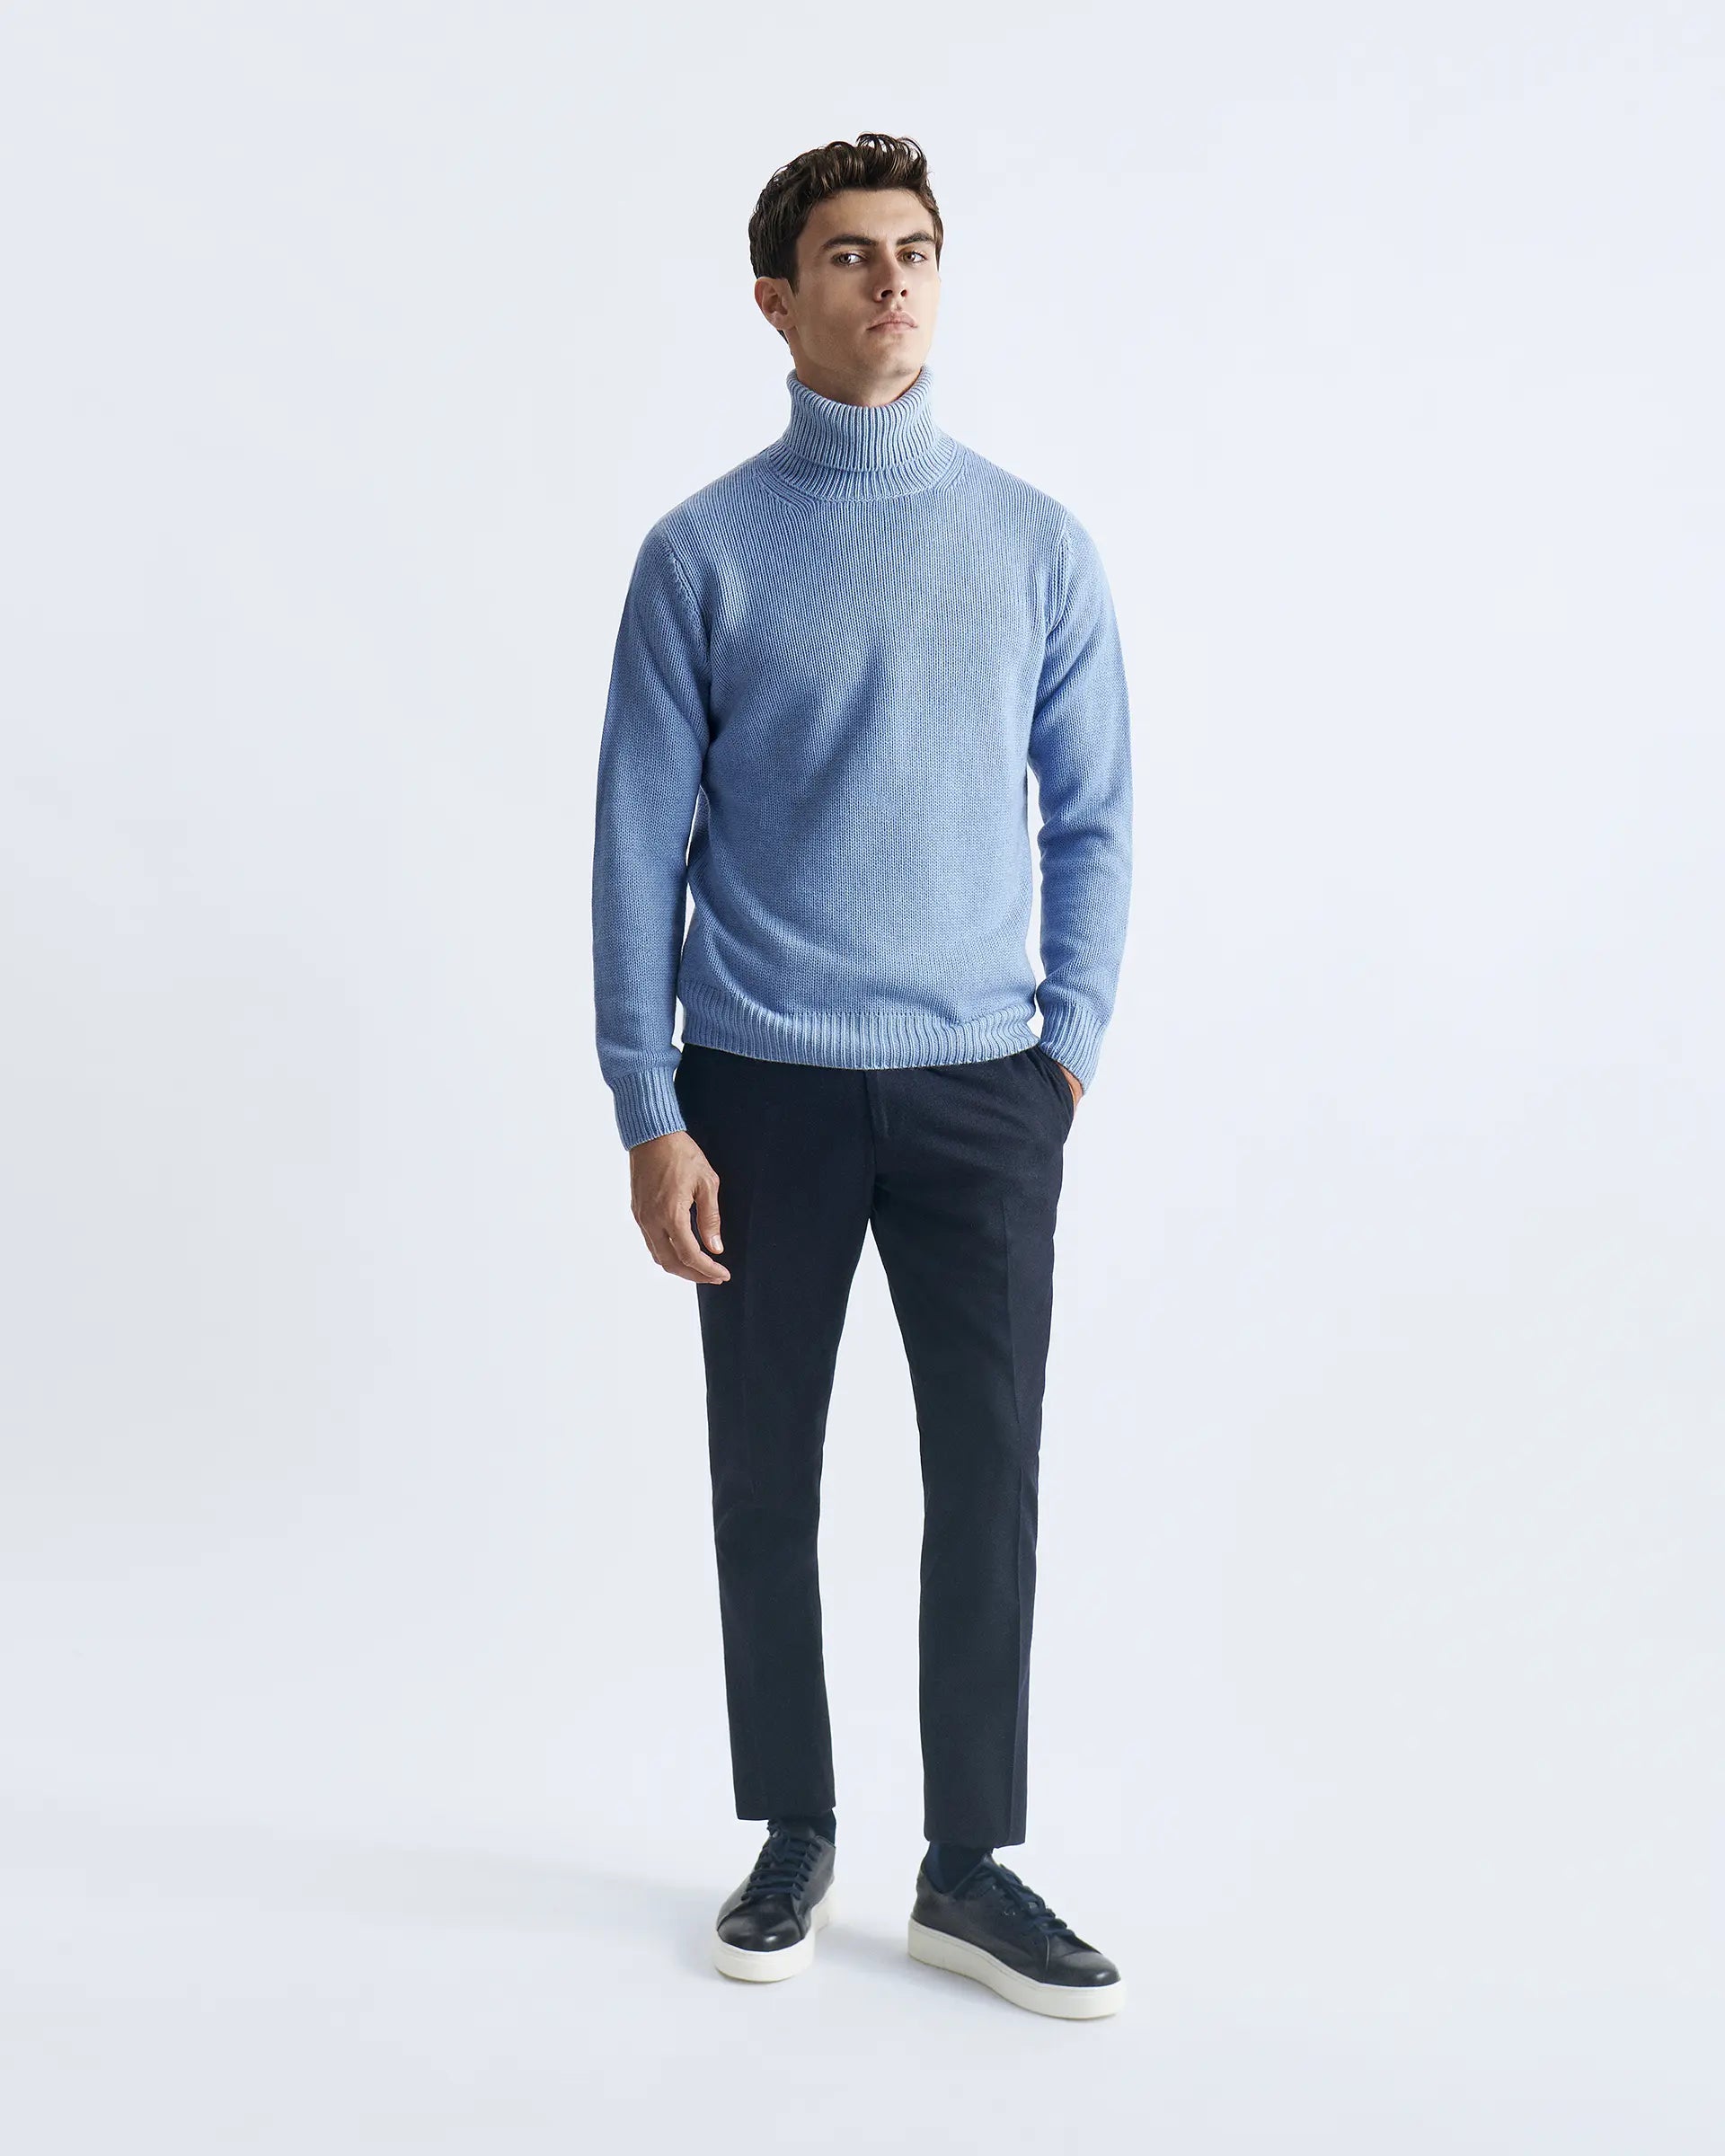 Light Blue Turtleneck in wool silk and cashmere